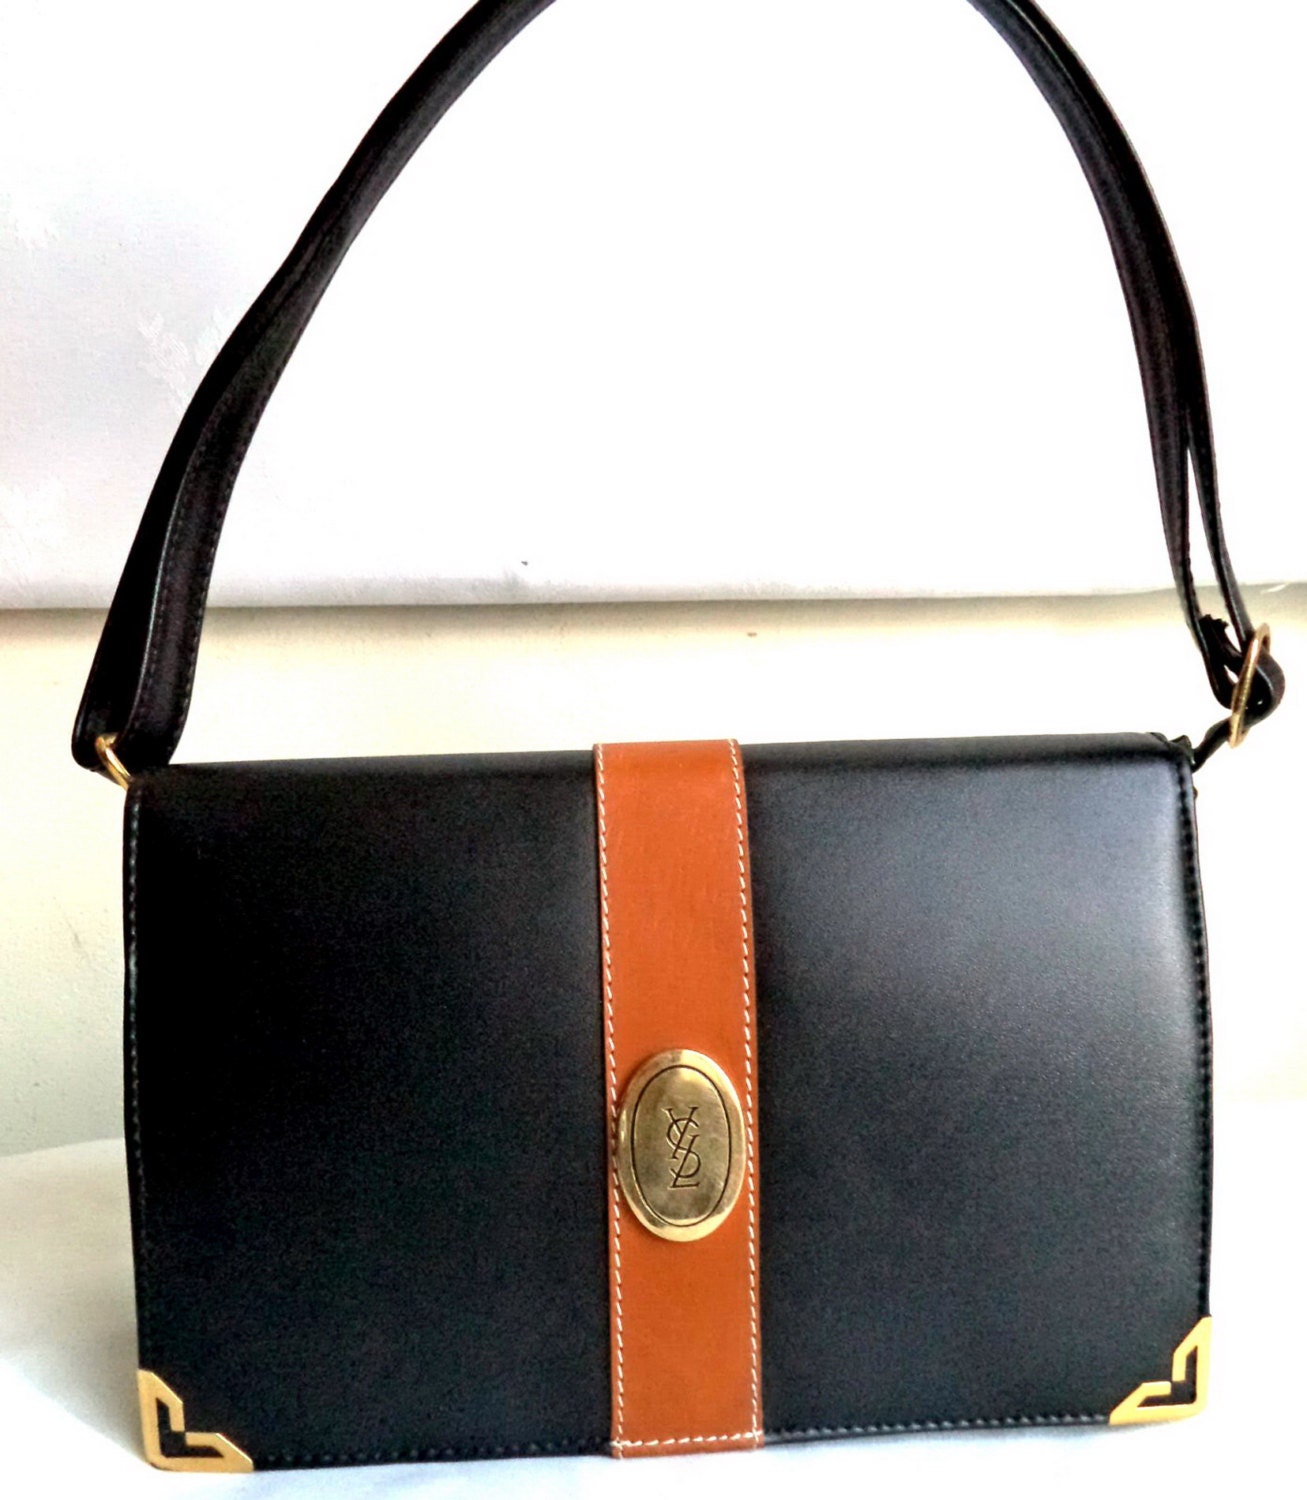 Popular items for vintage gucci bag on Etsy